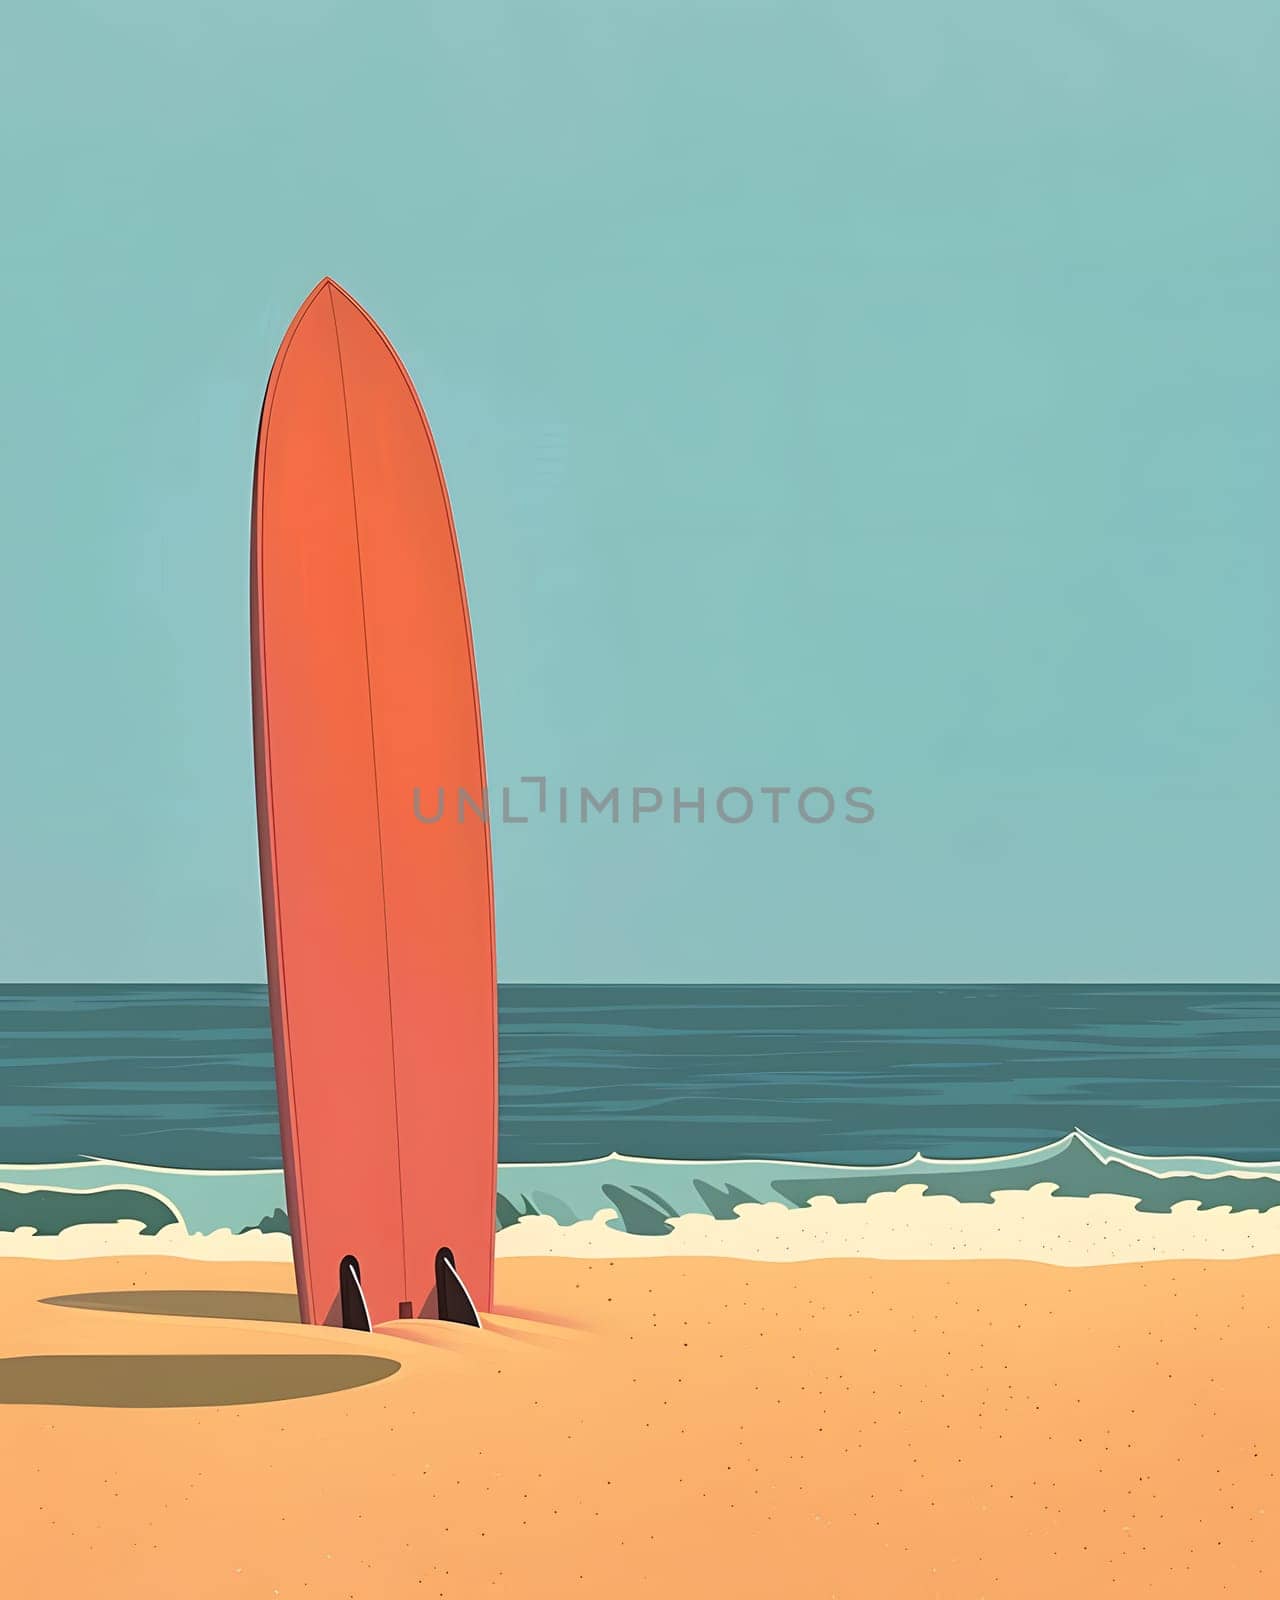 a red surfboard is sitting on a sandy beach near the ocean by Nadtochiy